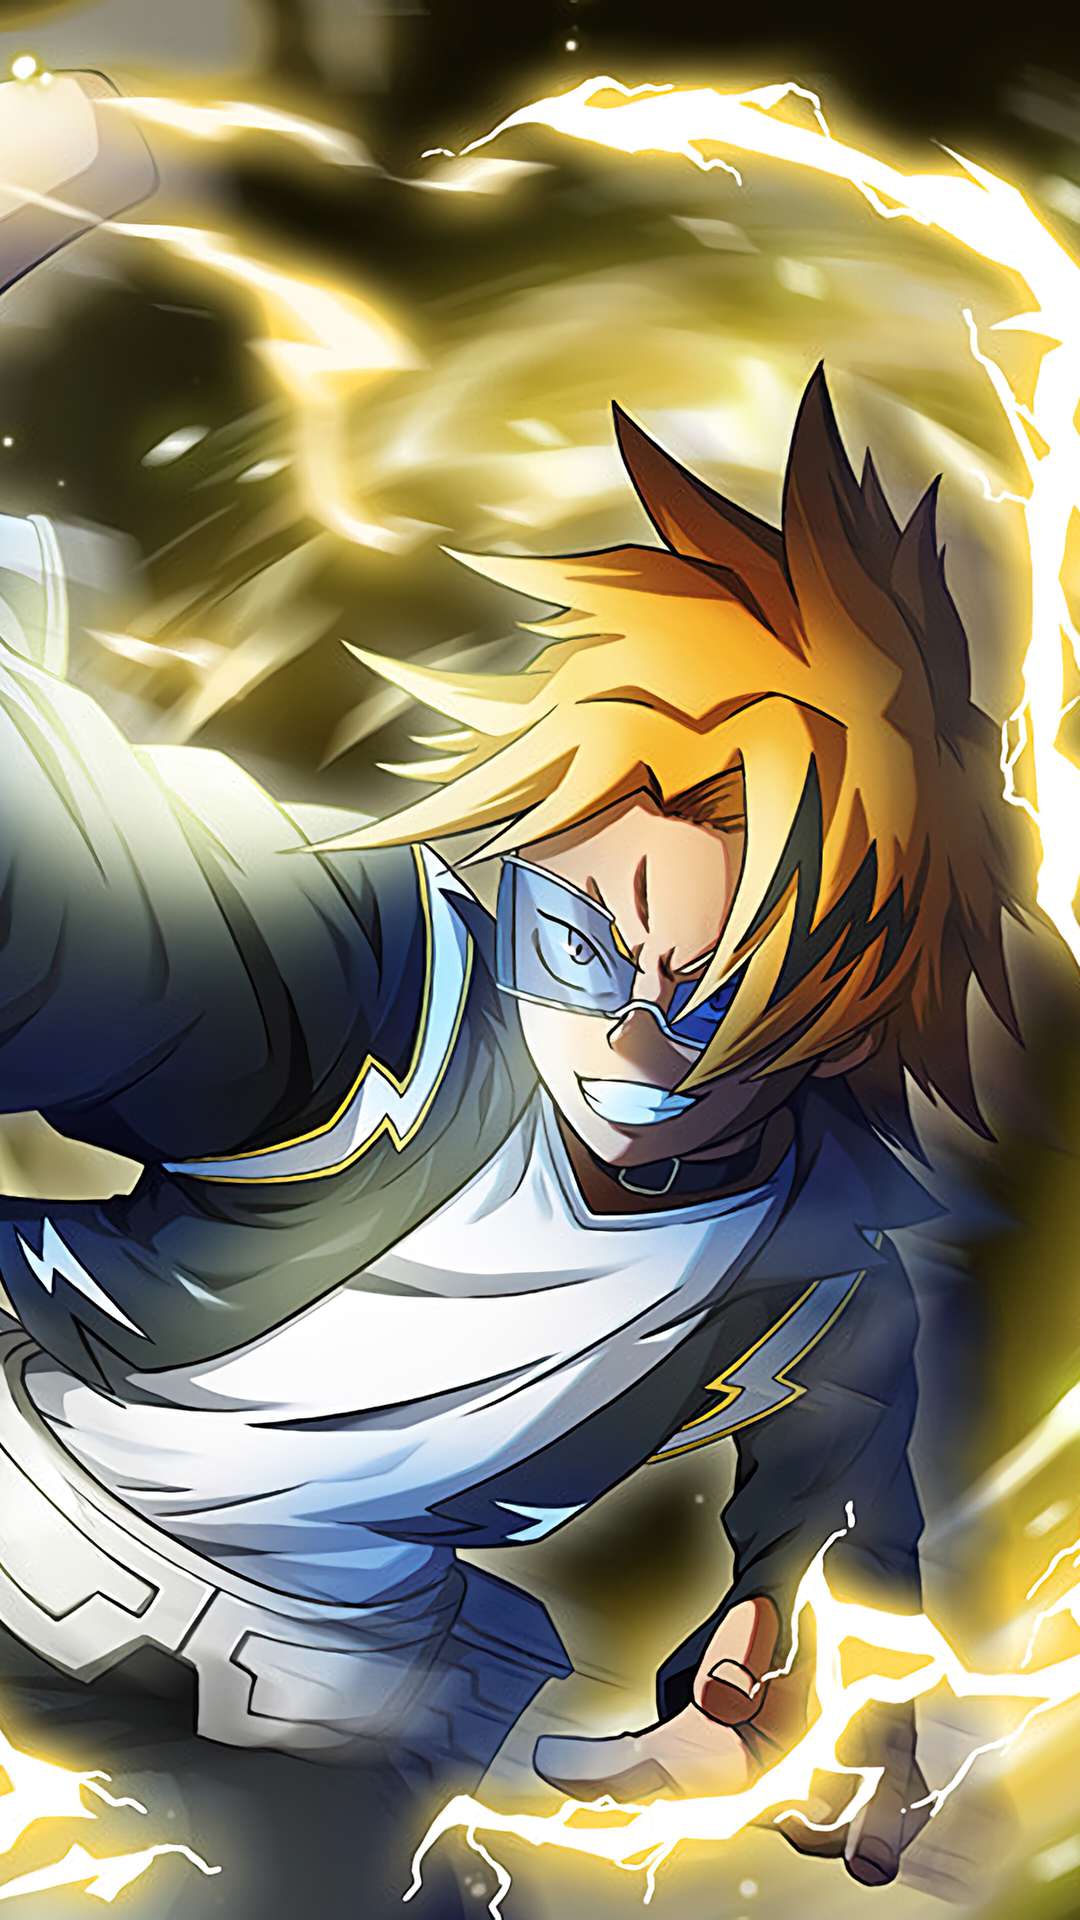 Kaminari Wallpaper by DamionMauville on DeviantArt | Anime background,  Anime canvas, Aesthetic anime